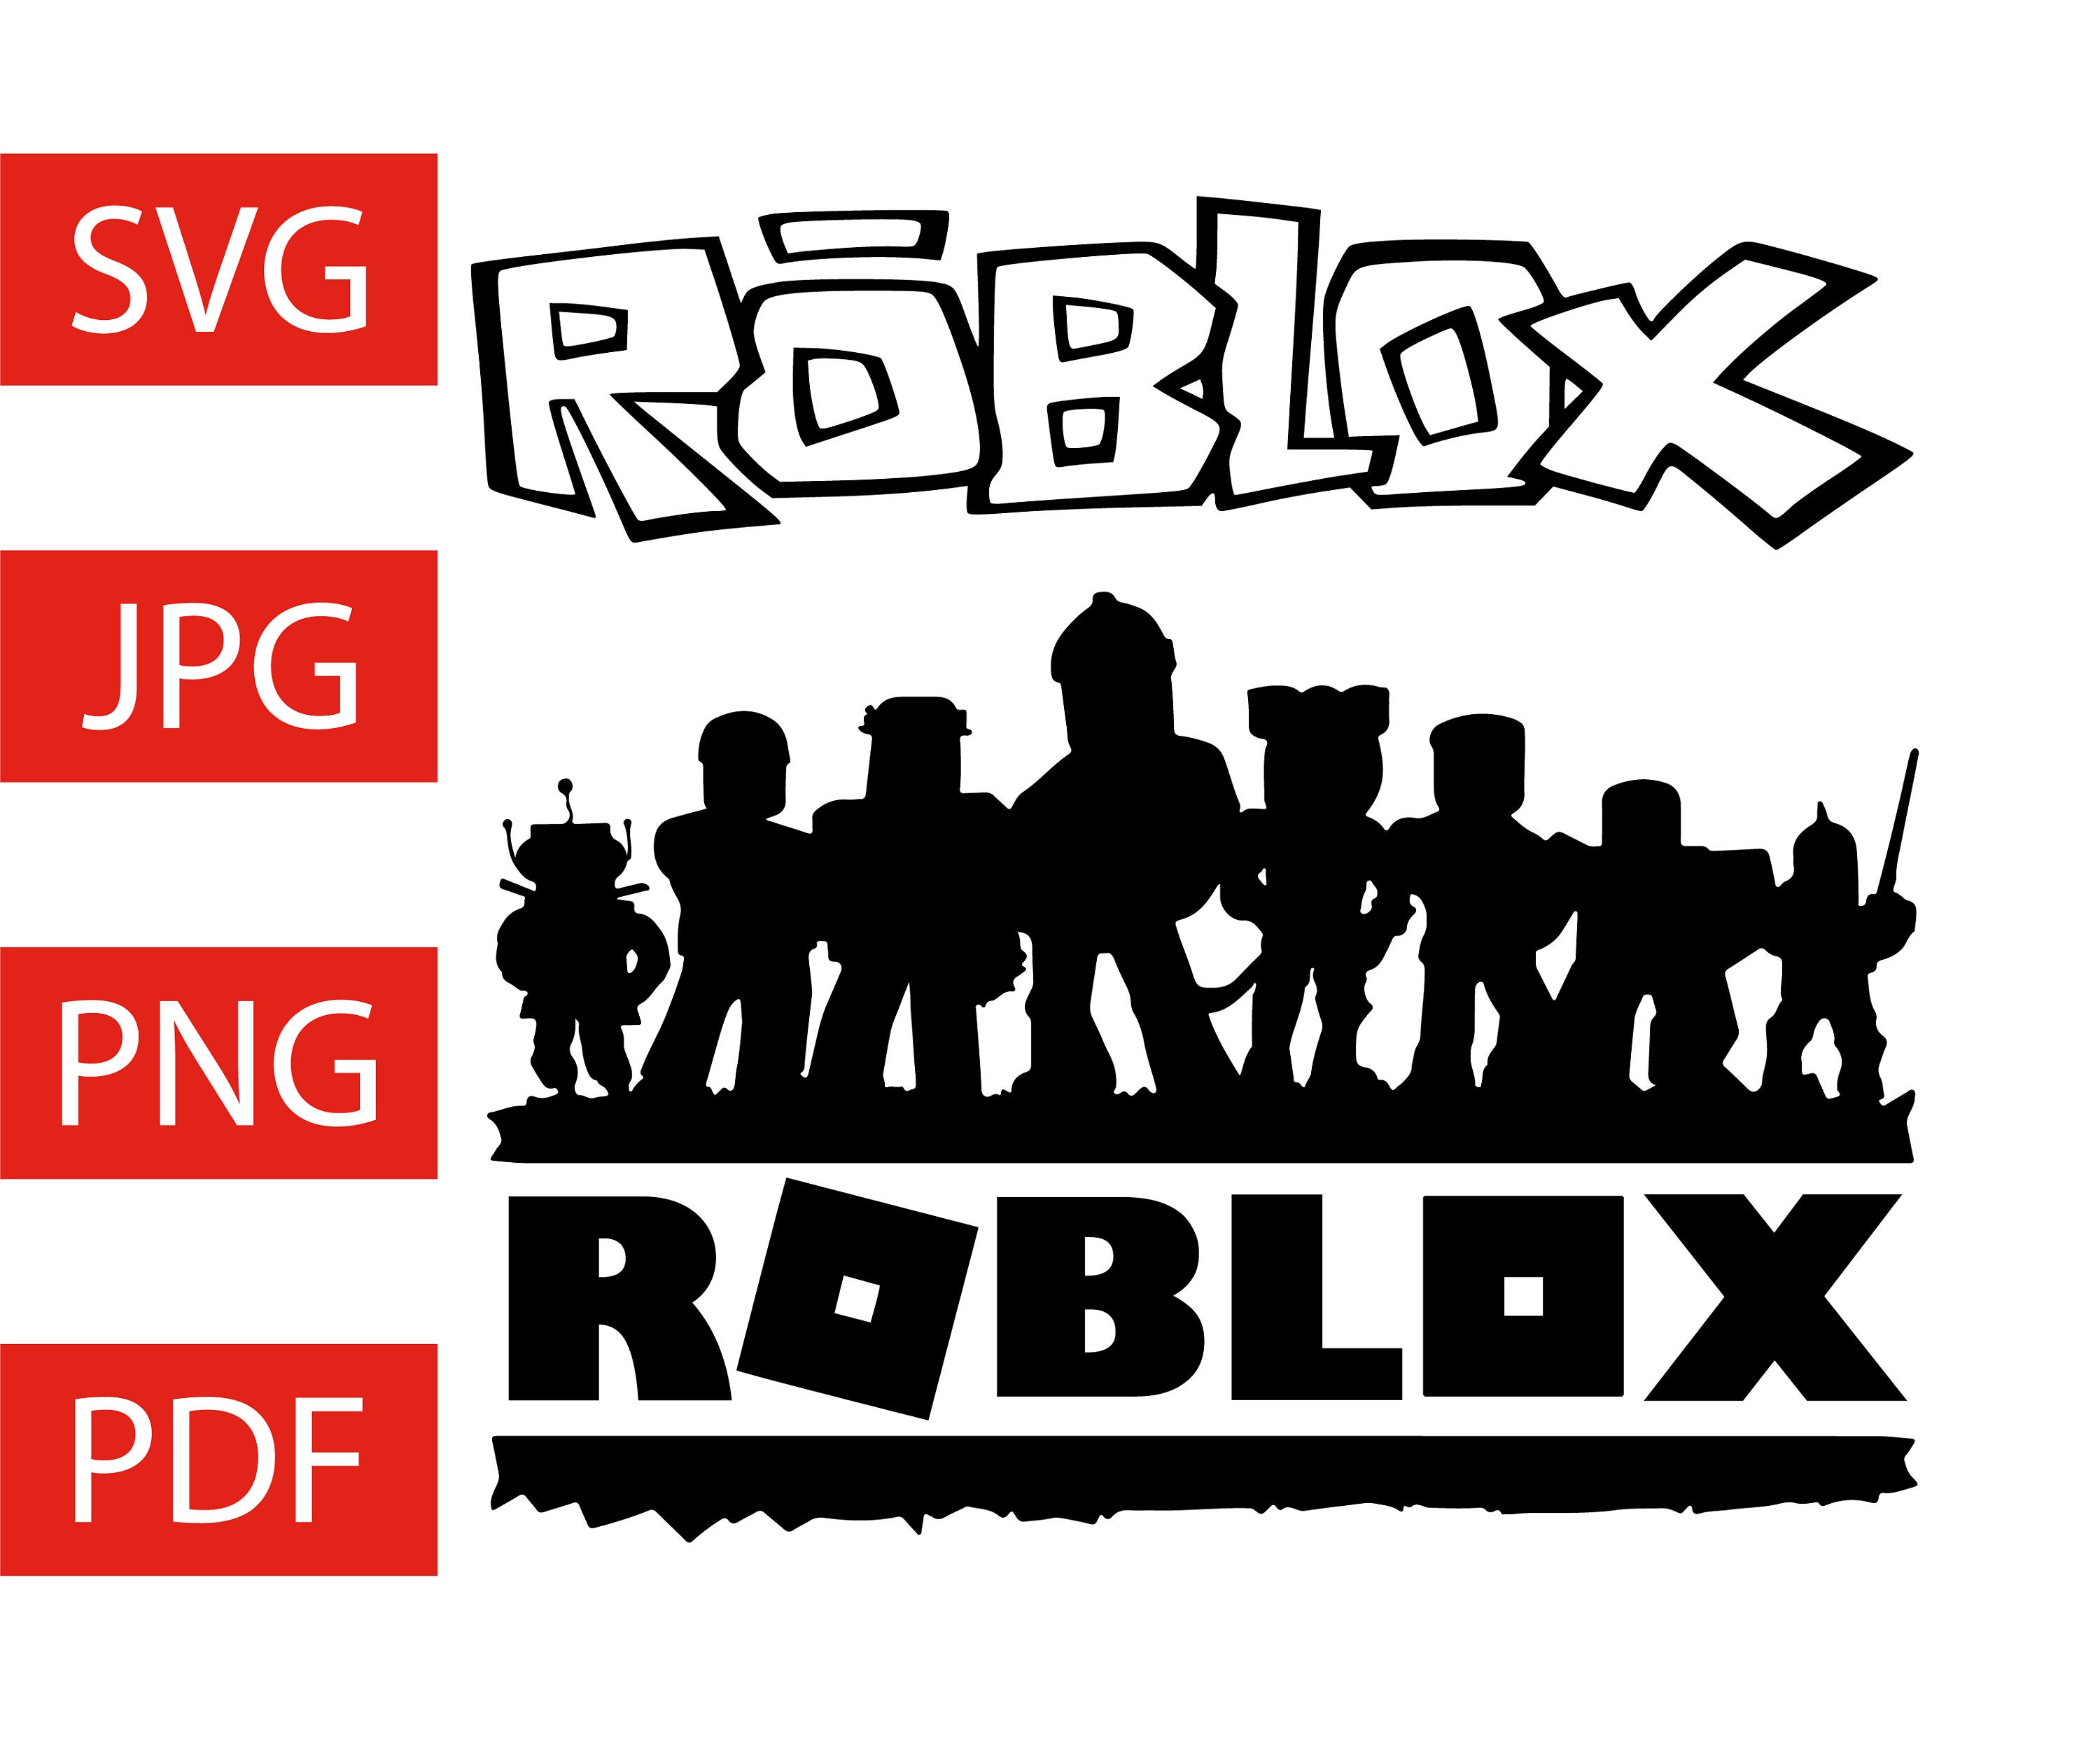 how to download a template roblox